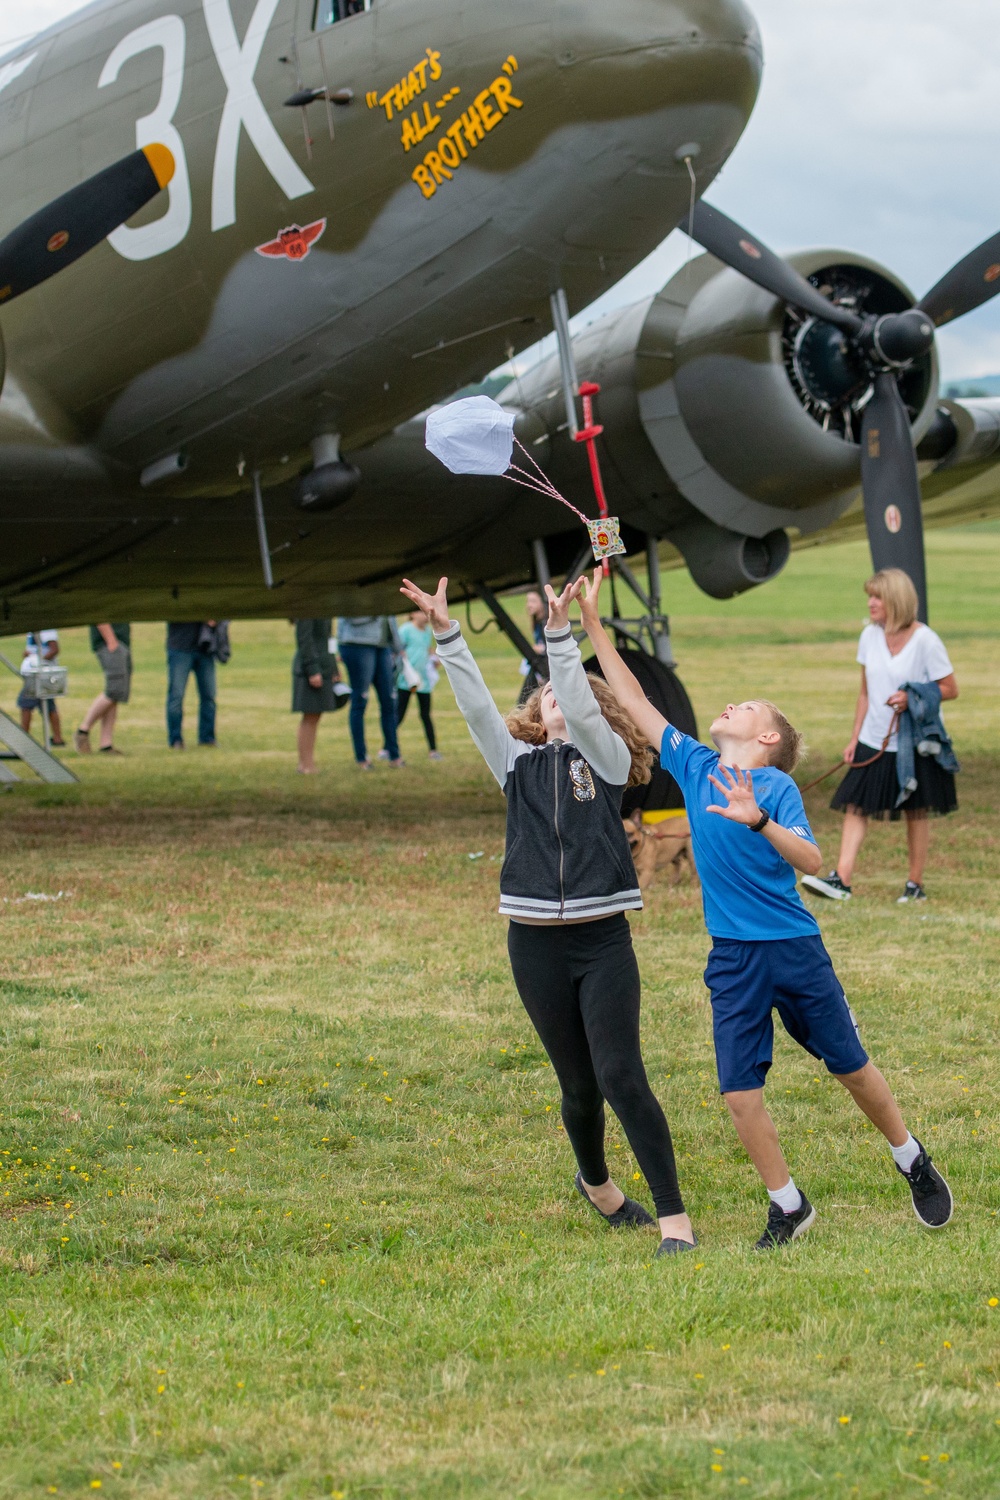 Children play with a &quot;Candy Parachute&quot; in front of a Dakota DC3 Aircraft